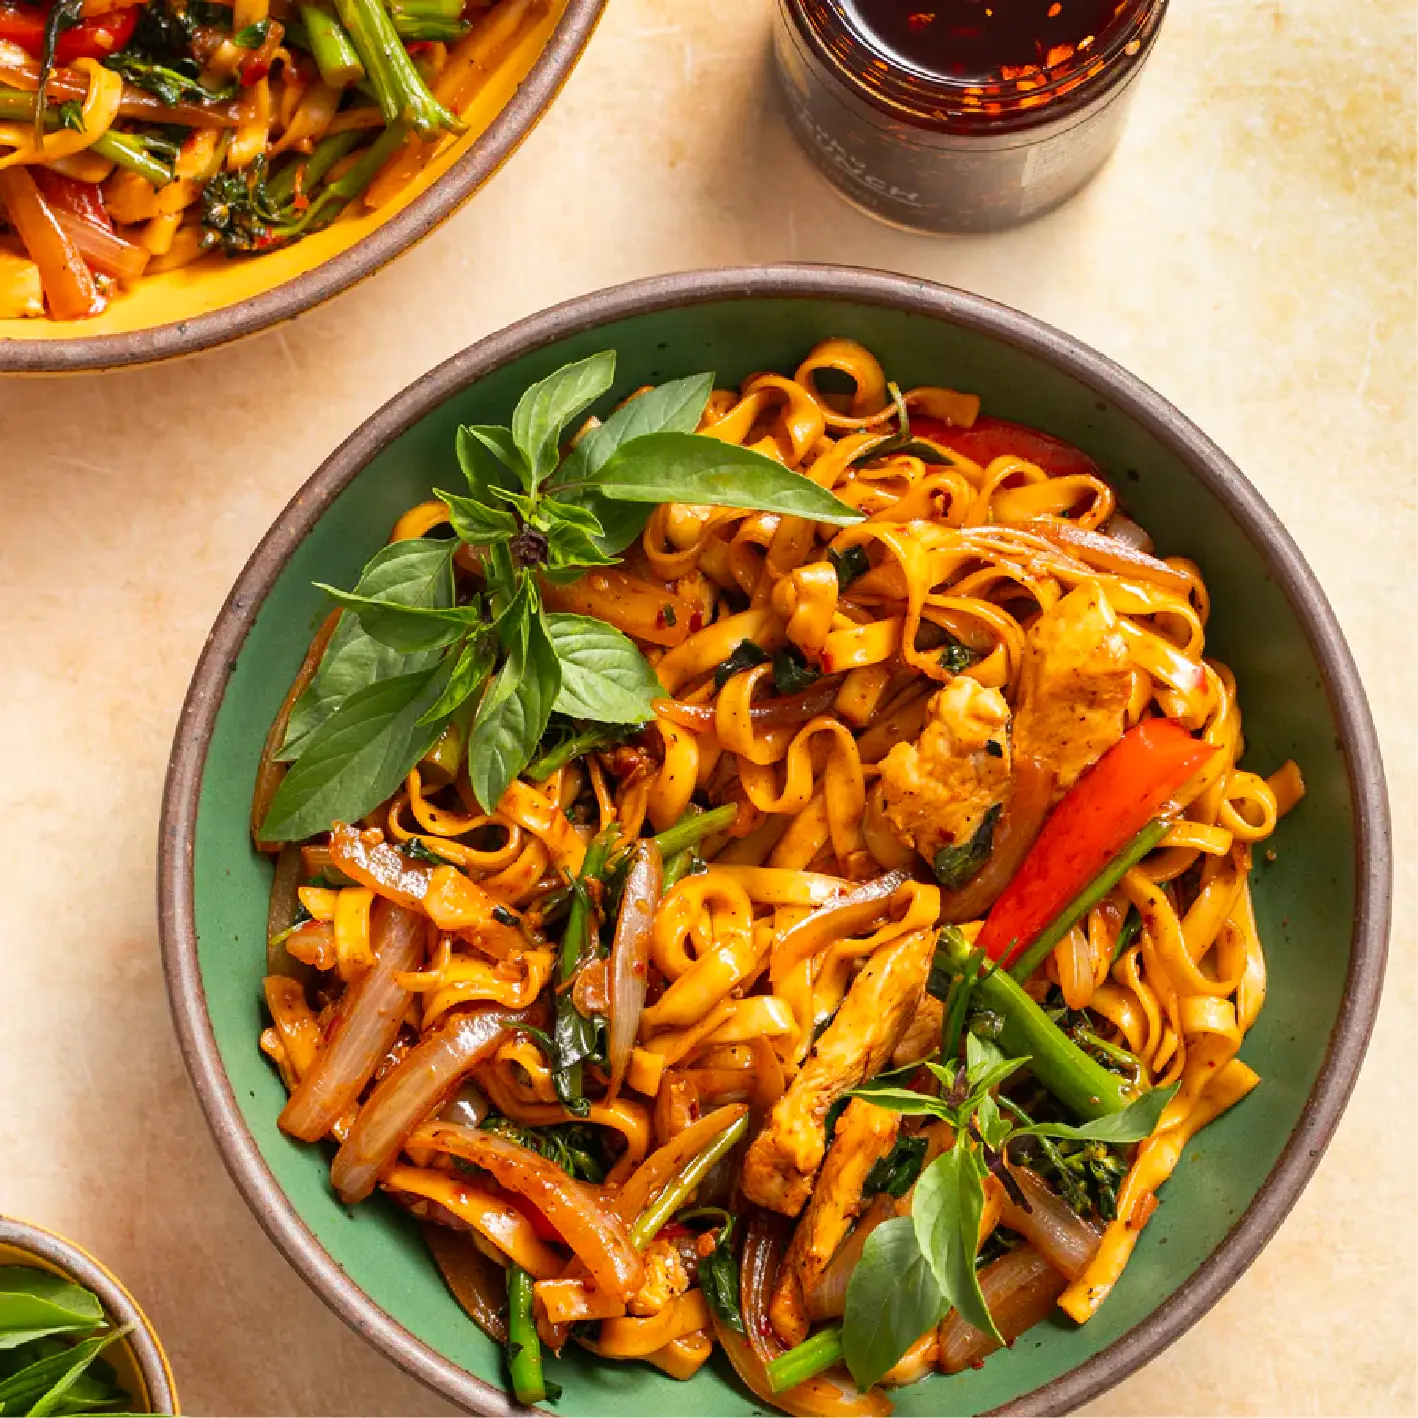 Sweet and Spicy Noodles Delivery